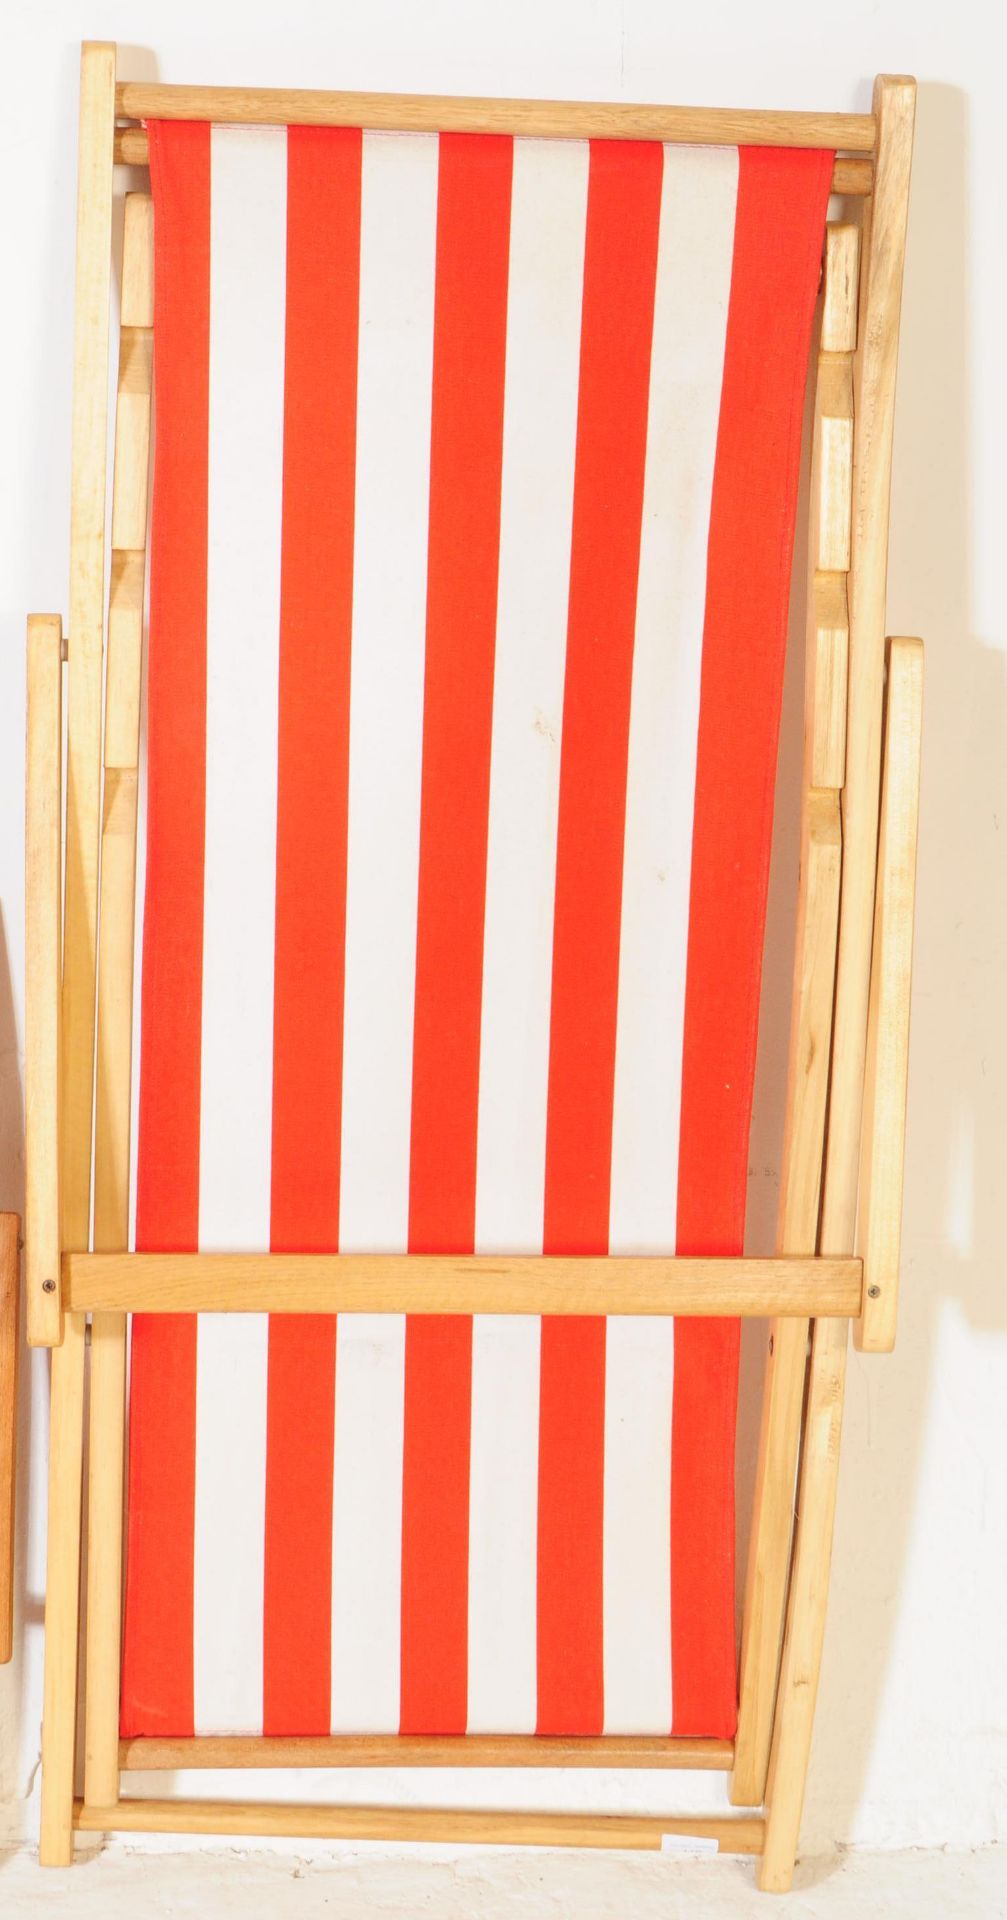 FOUR BEECH WOOD BEACH DECK CHAIRS - Image 7 of 8